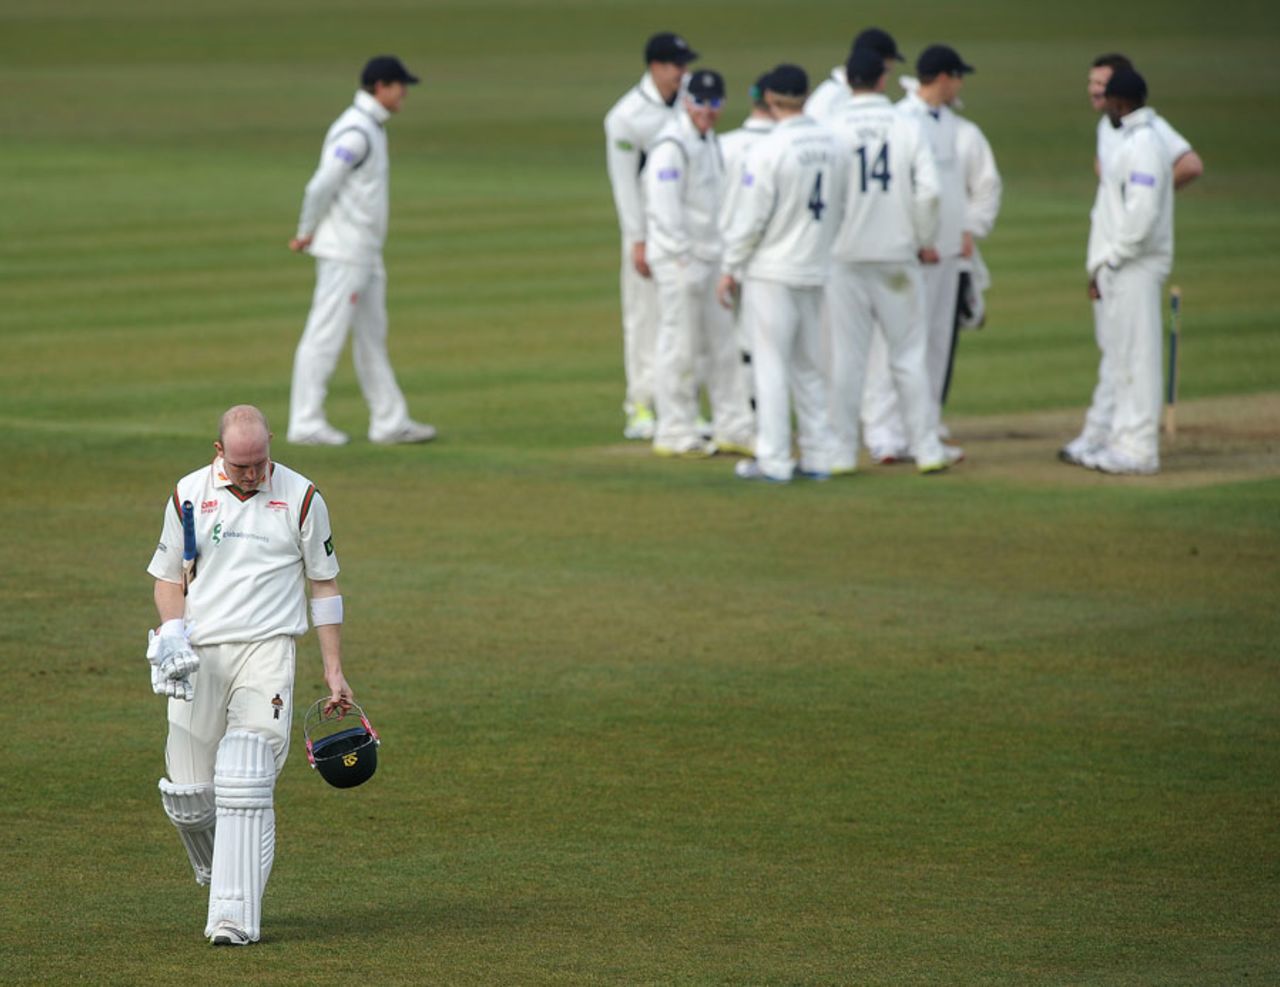 Michael Thornely walks off after making 14, Hampshire v Leicestershire, County Championship, Division Two, Ageas Bowl, 2nd day, April 11, 2013